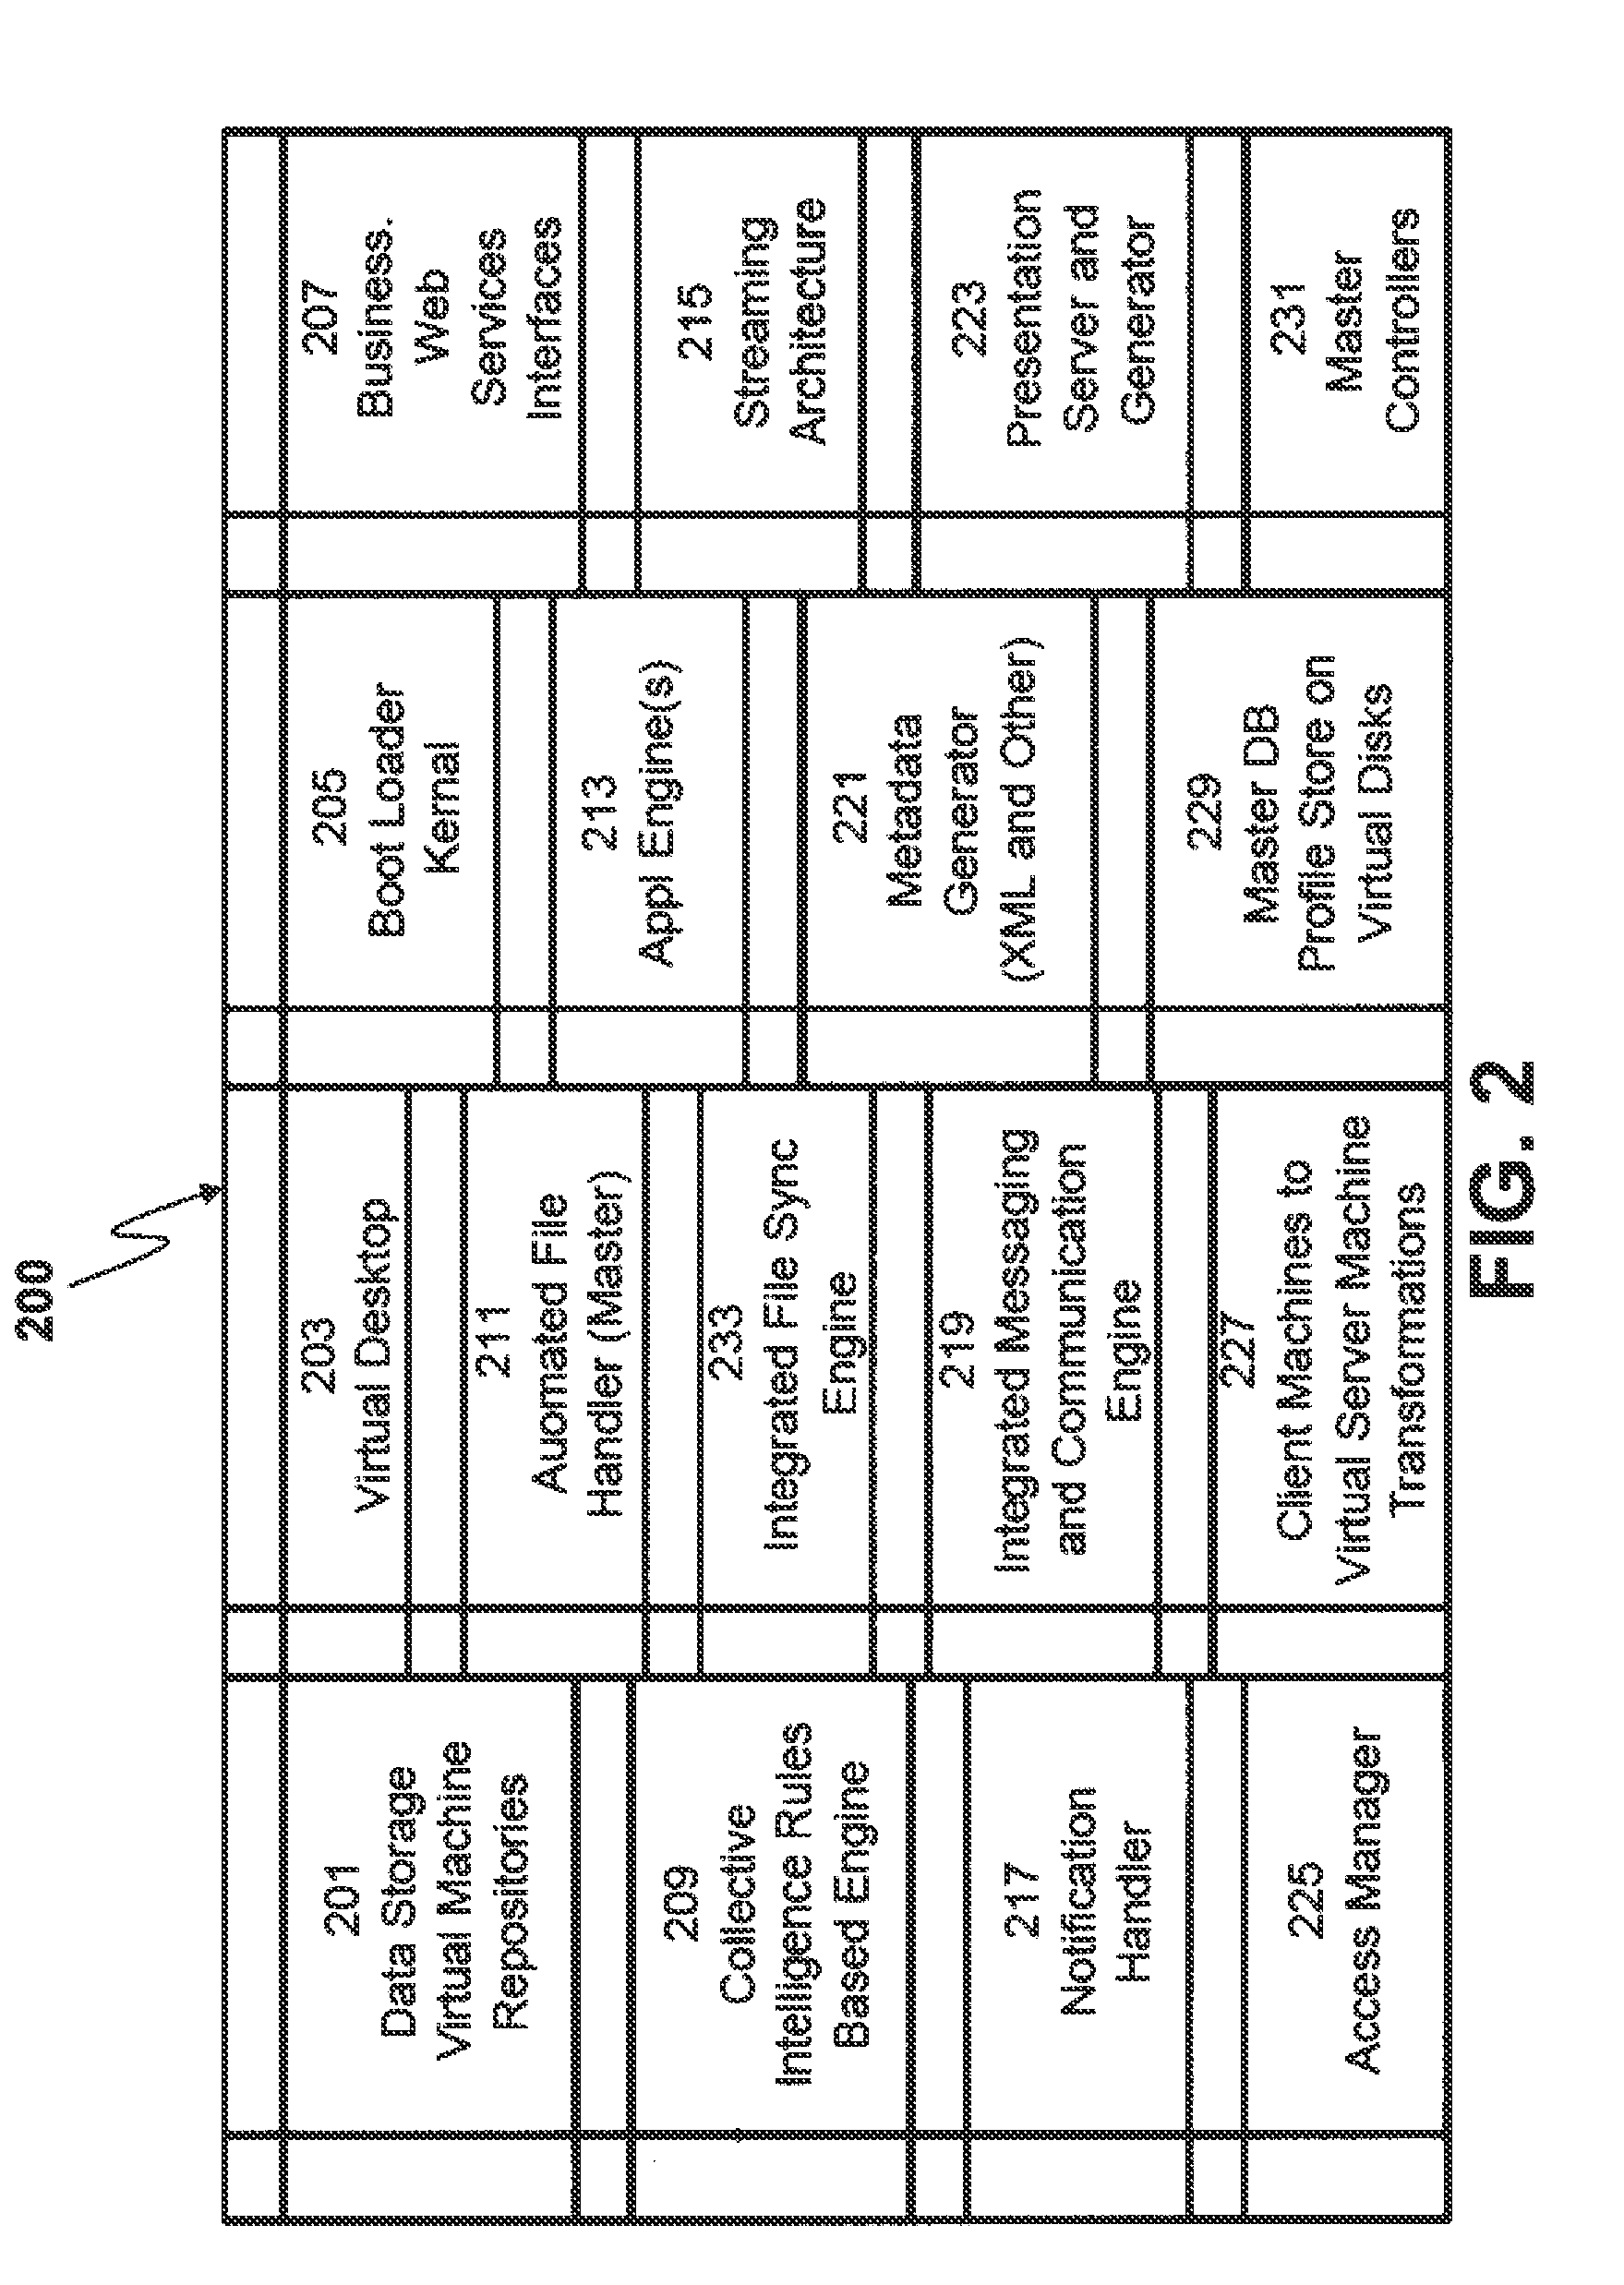 Distributed Hybrid Virtual Media and Data Communication System